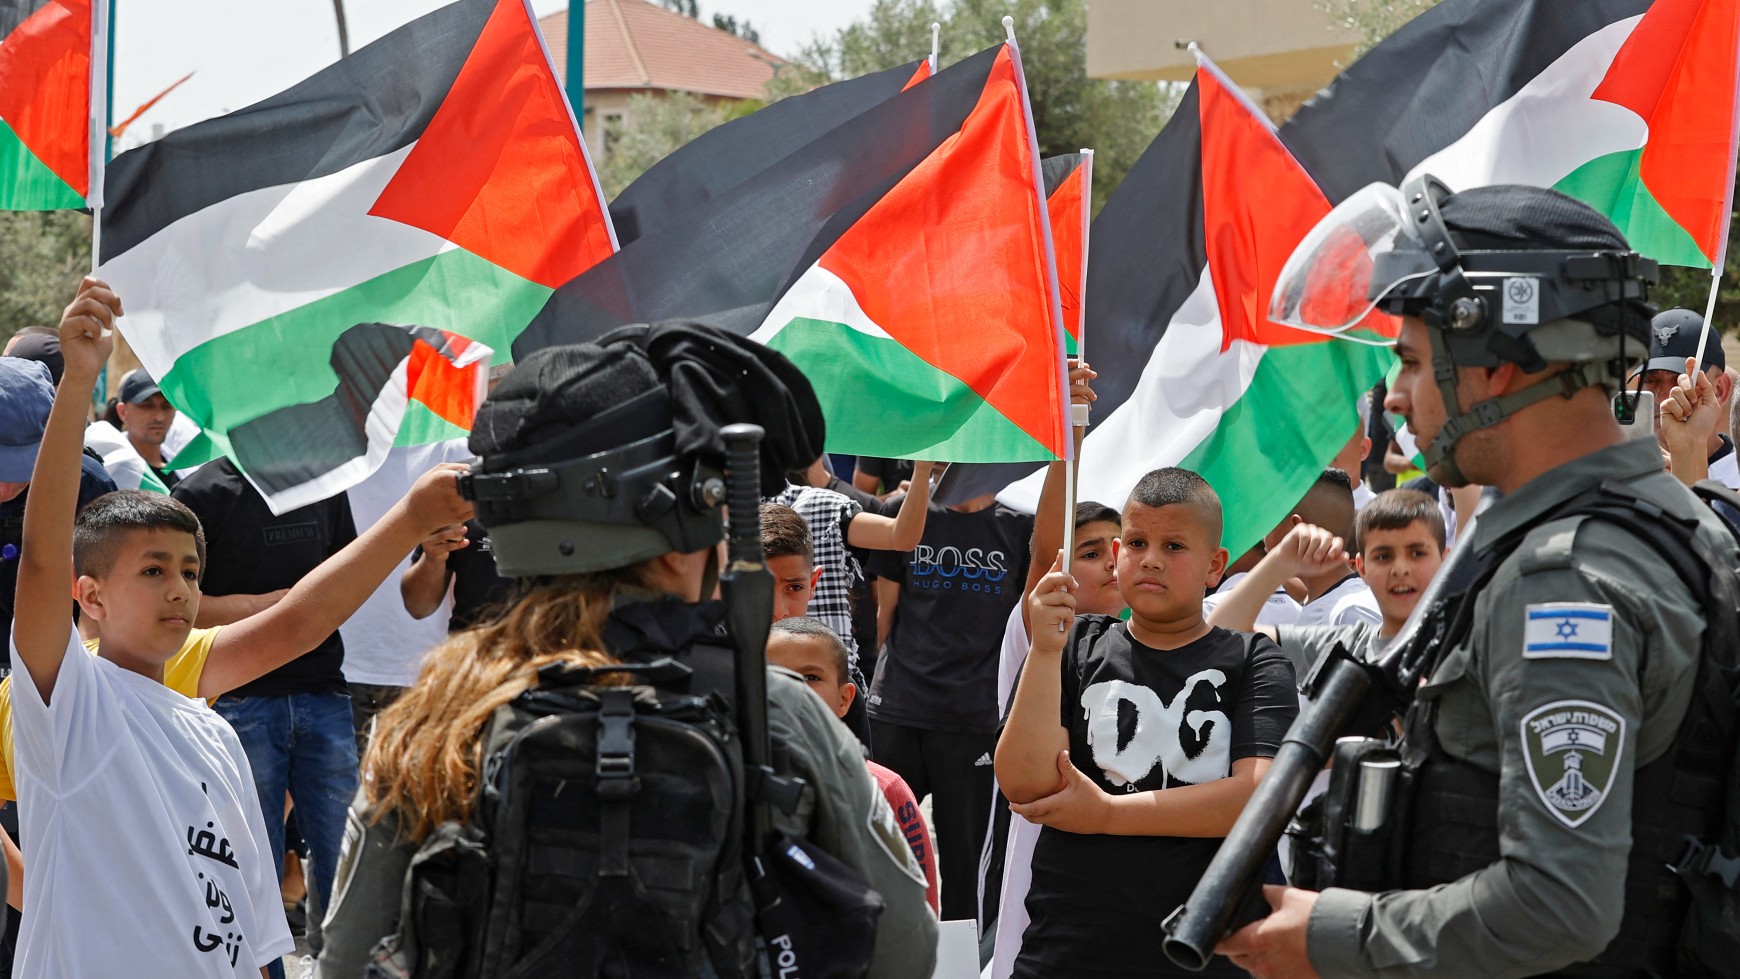 Palestinian citizens of Israel rally in the mixed city of Lydd on 13 May 2022 (AFP)